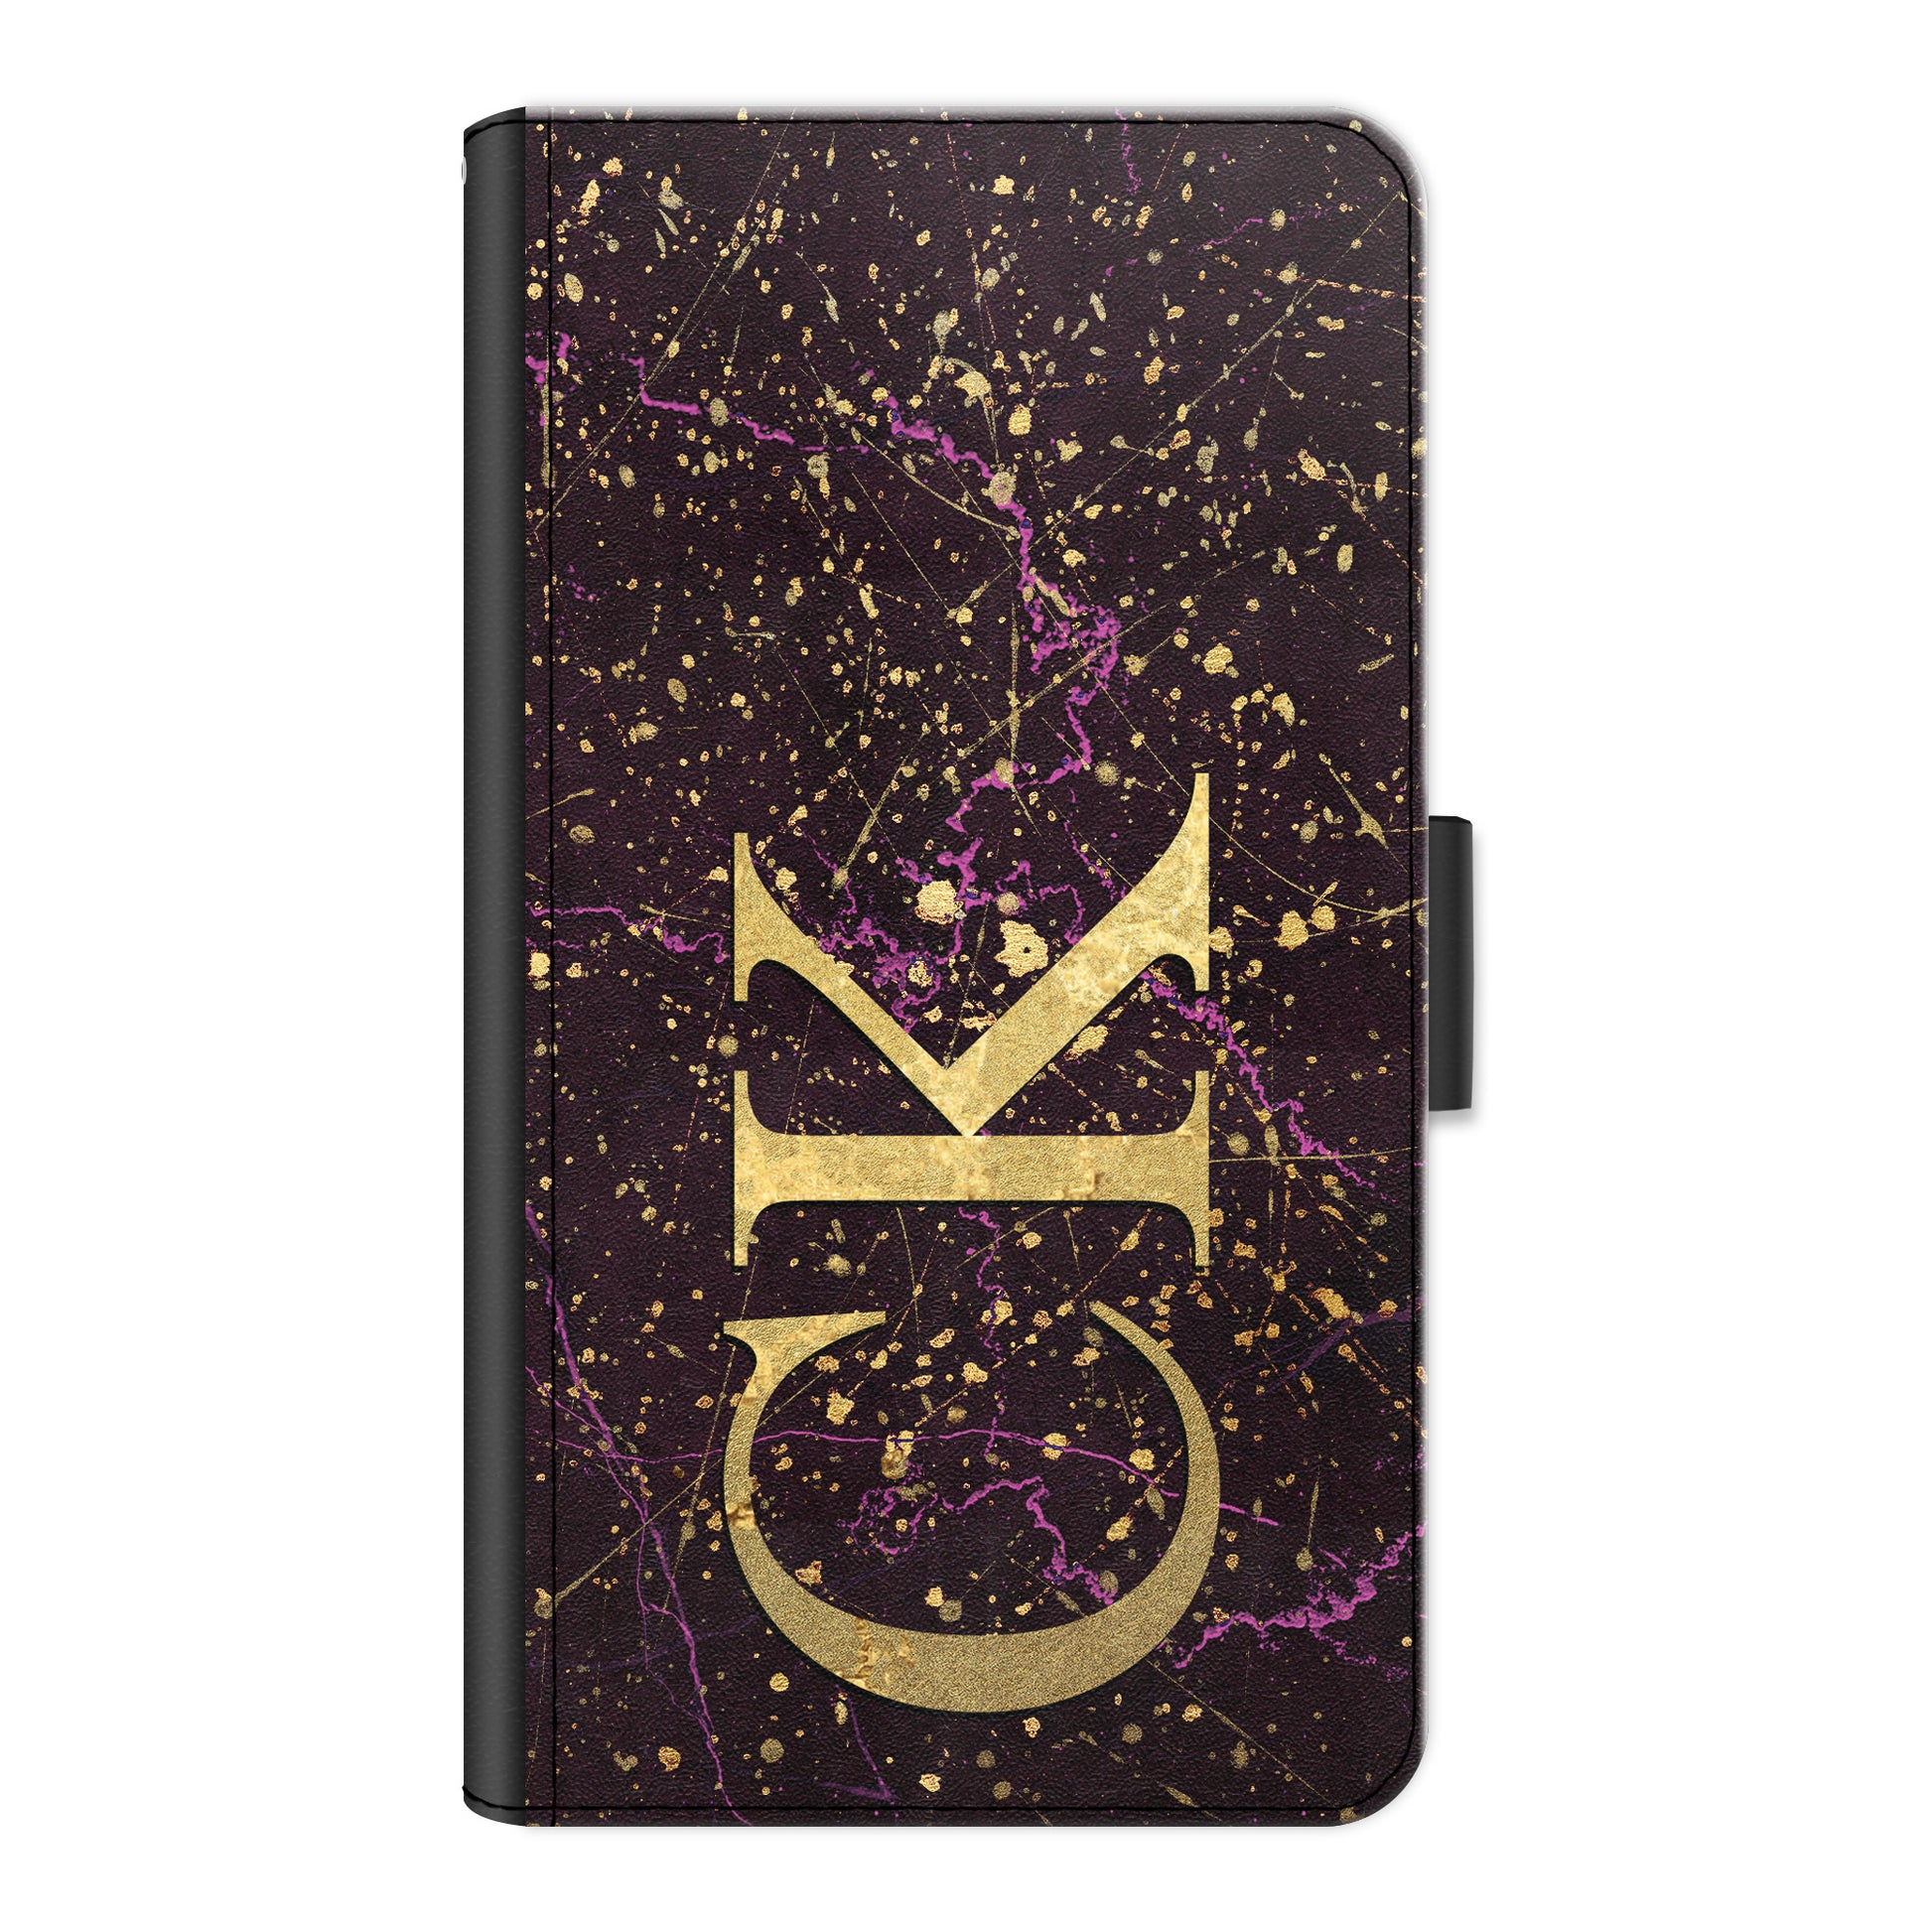 Personalised Google Phone Leather Wallet with Gold Initials on Pink and Gold Infused Black Marble